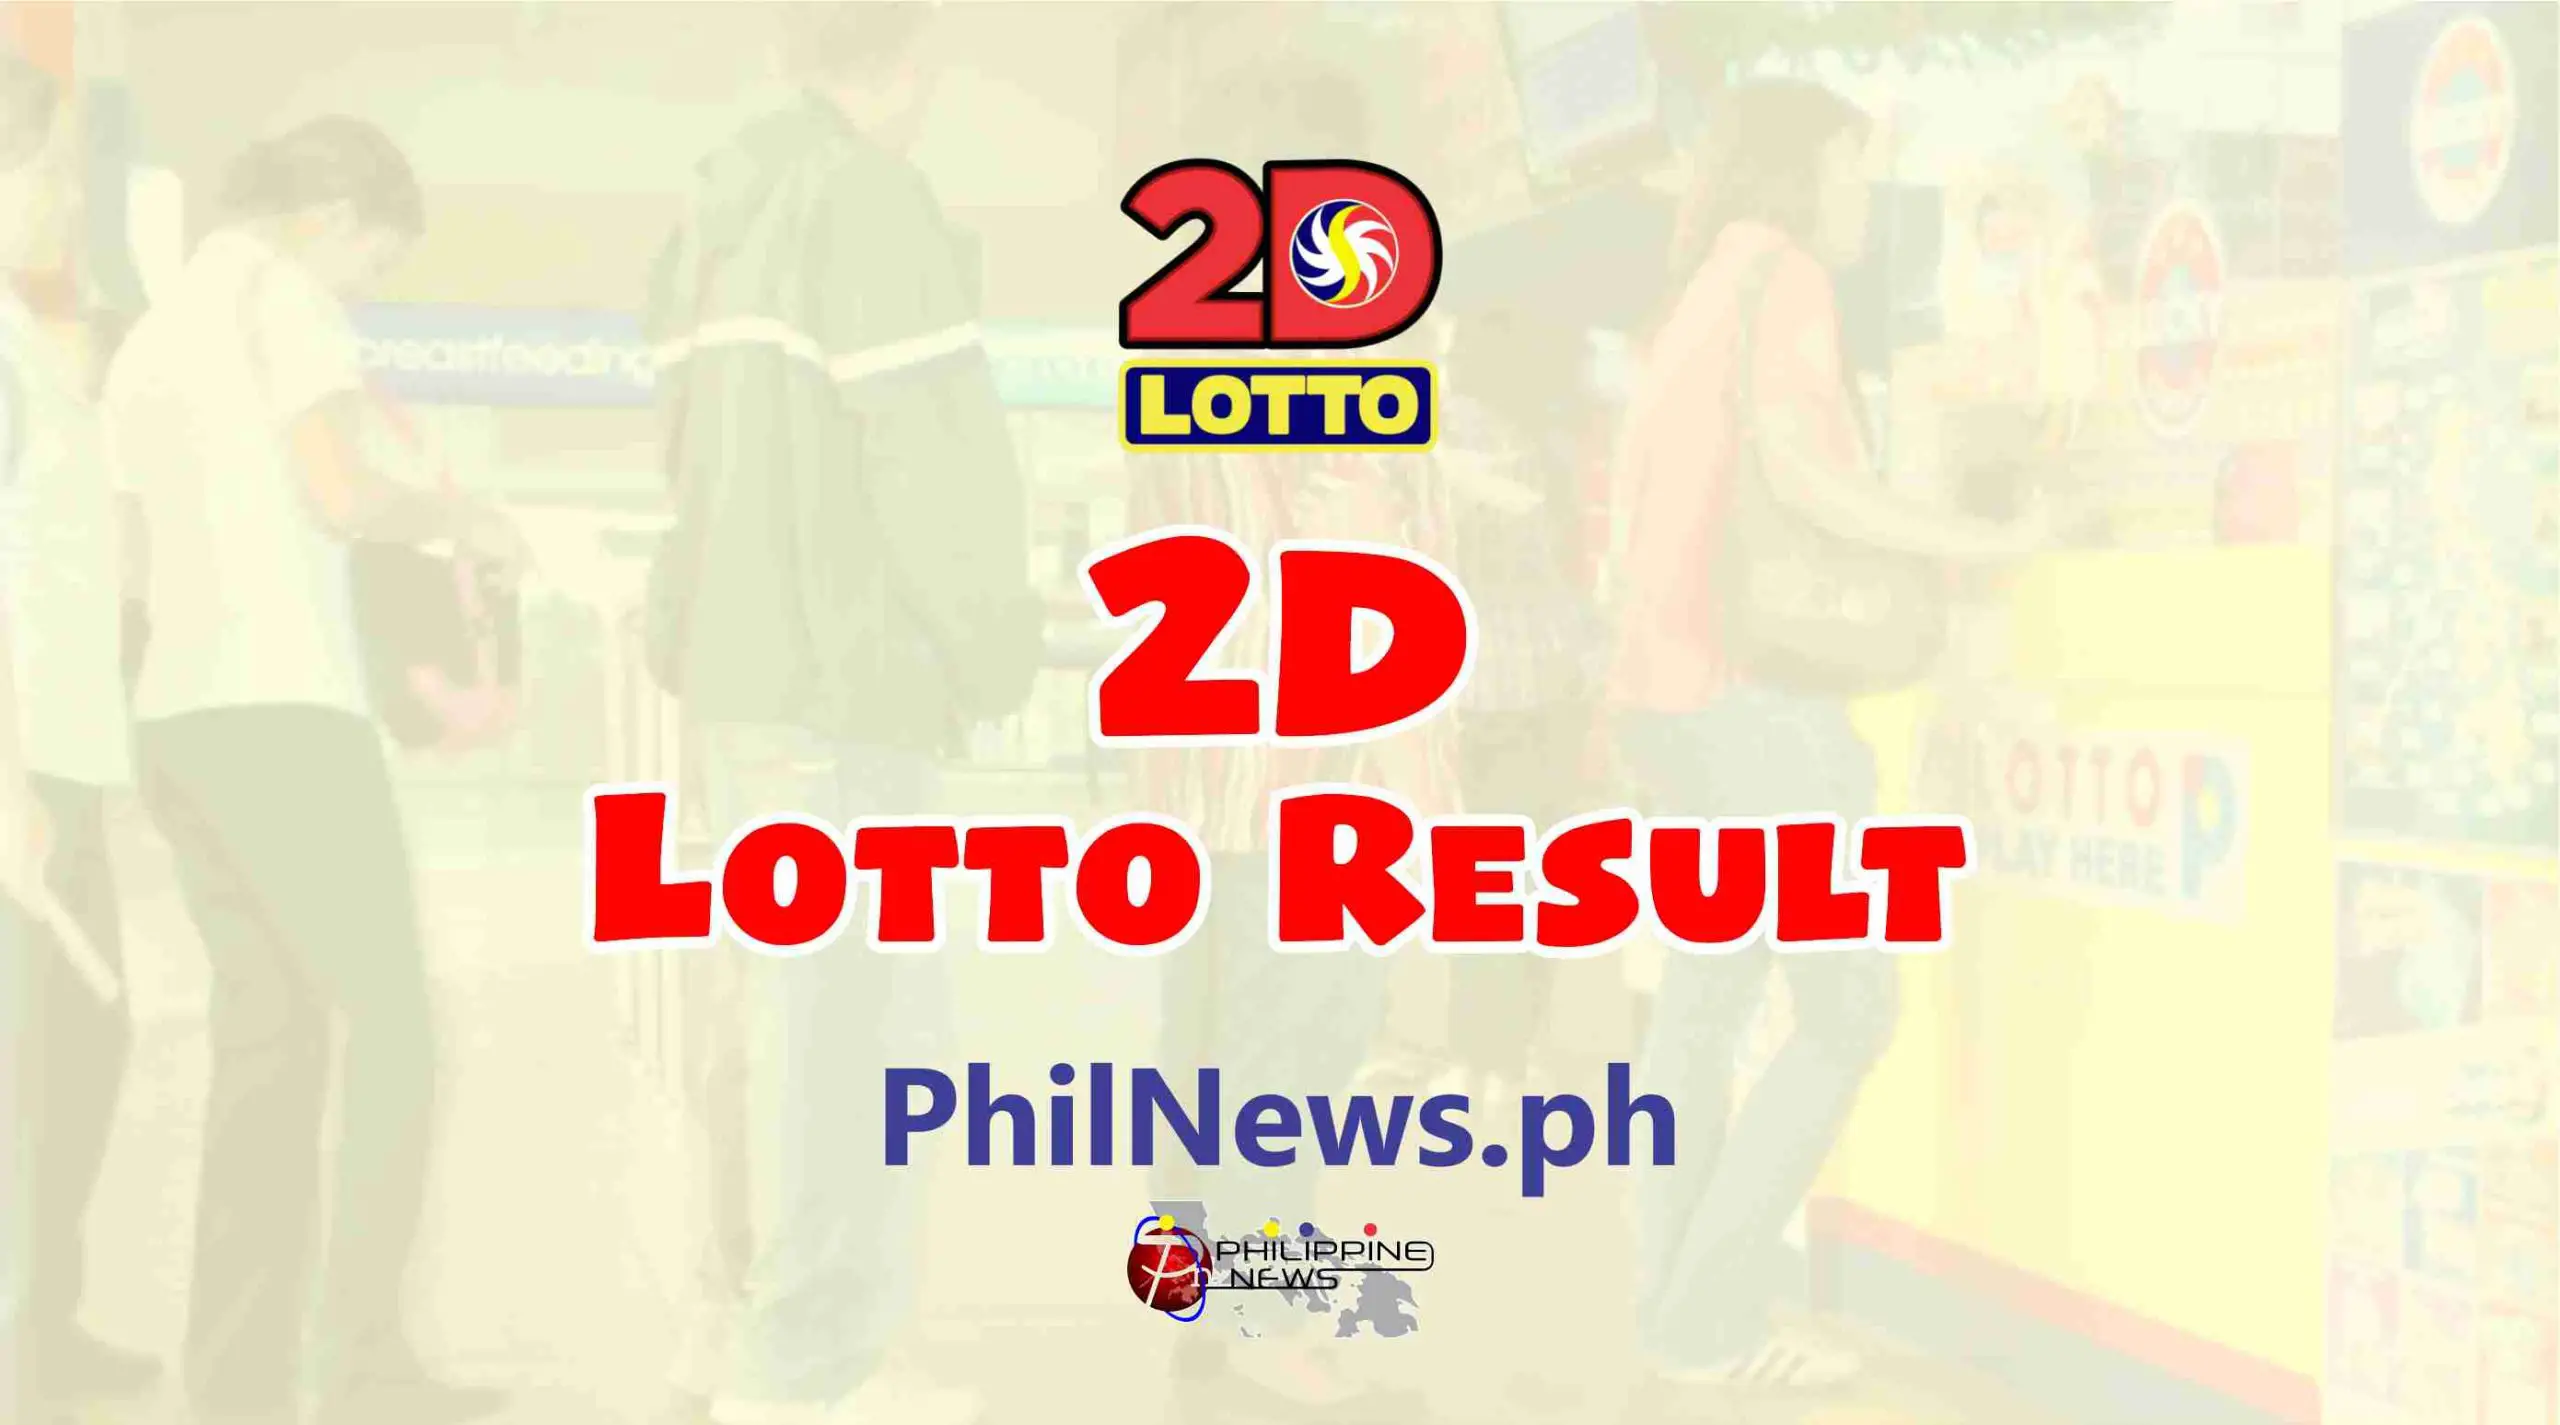 2D LOTTO RESULT Today, Thursday, August 4, 2022